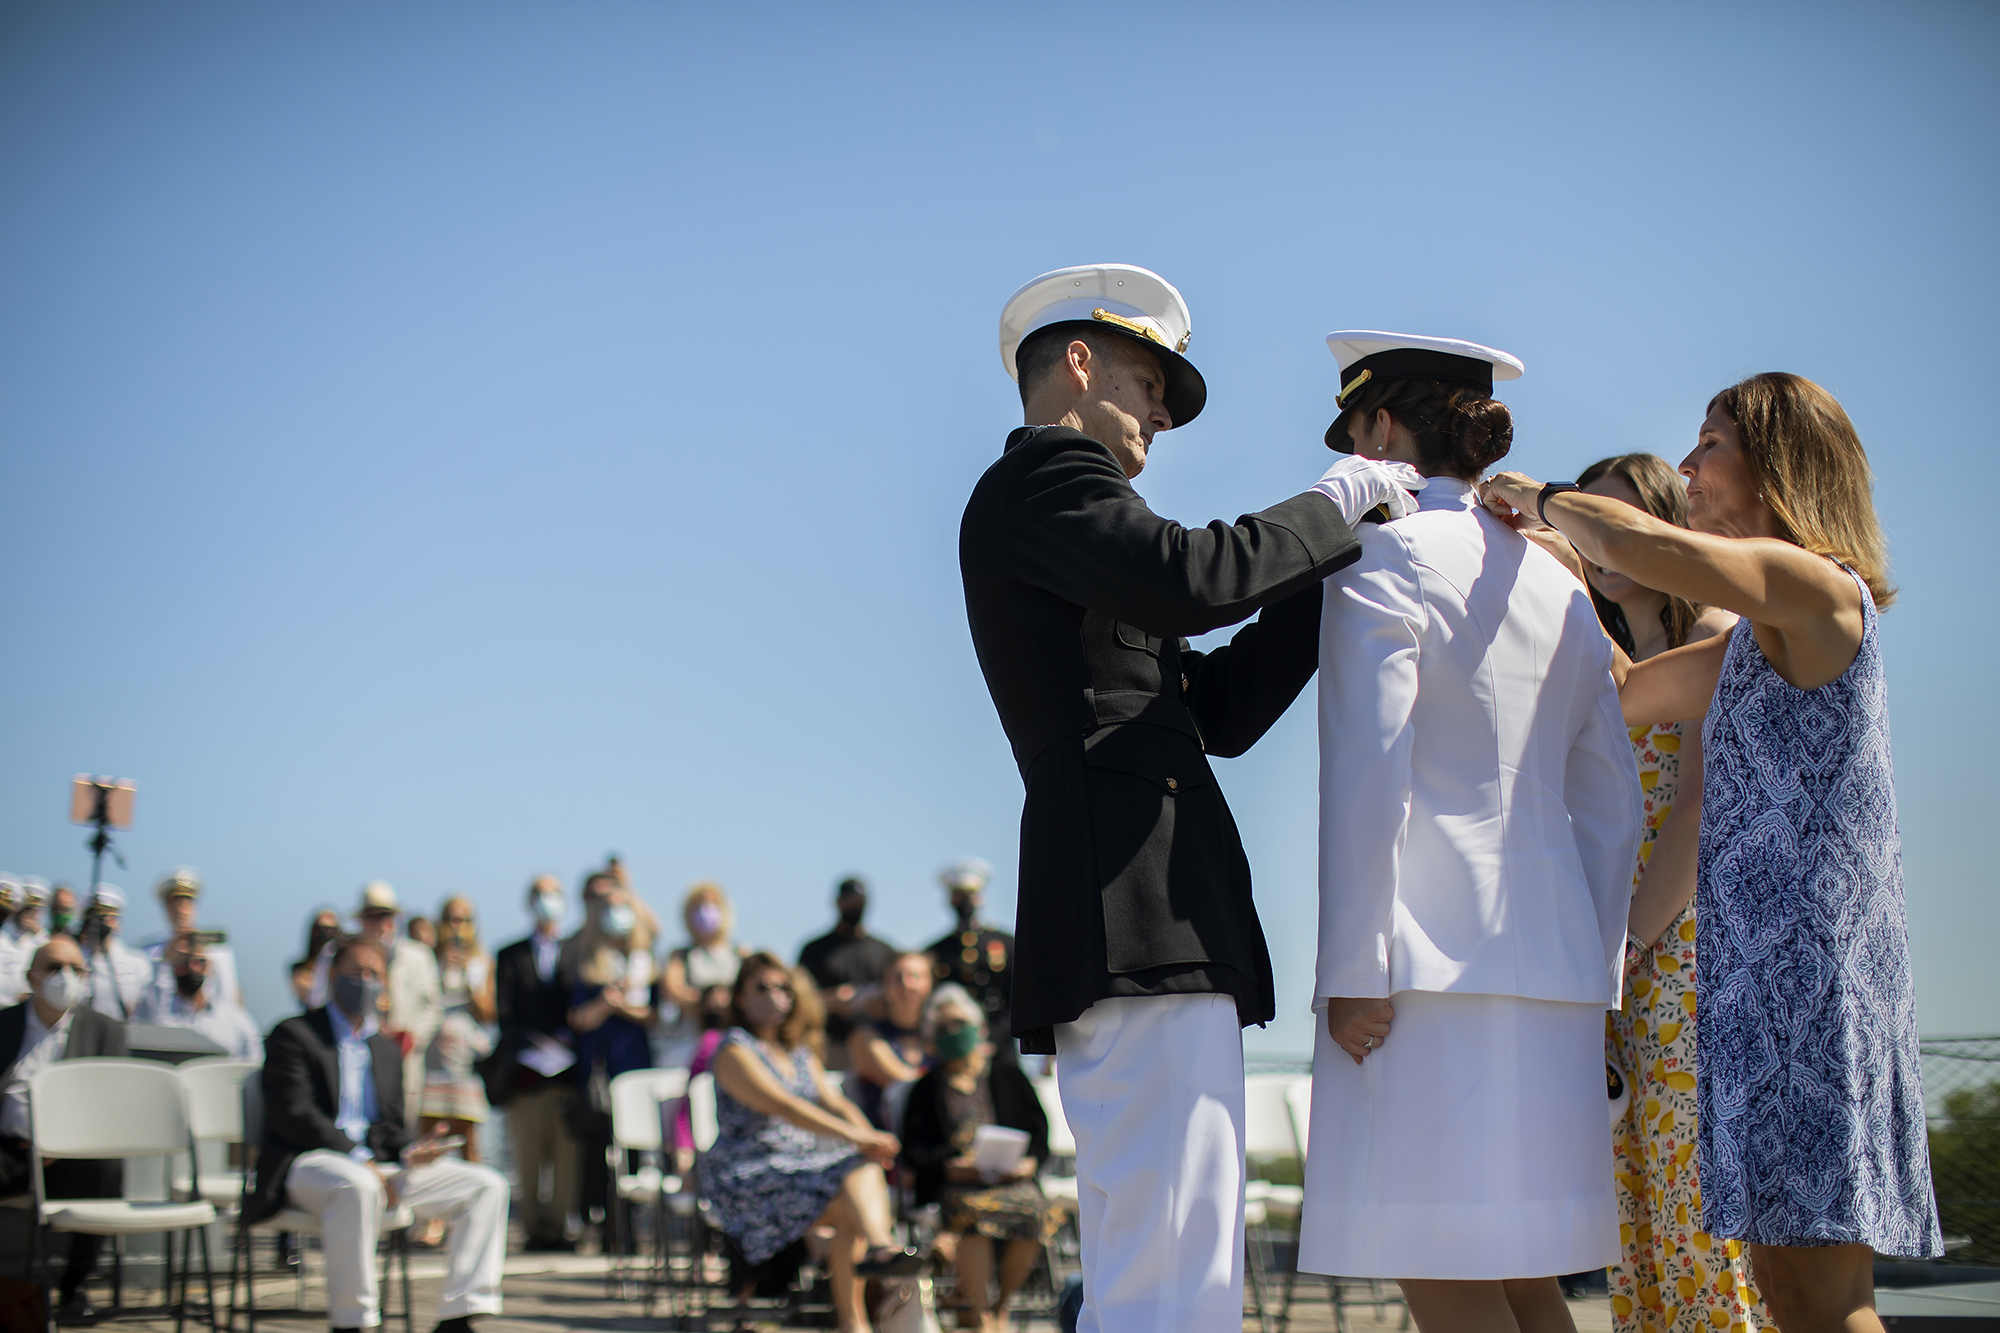 People aboard the USS New Jersey watch a midshipmen receive a medal by one person in uniform and a family member.